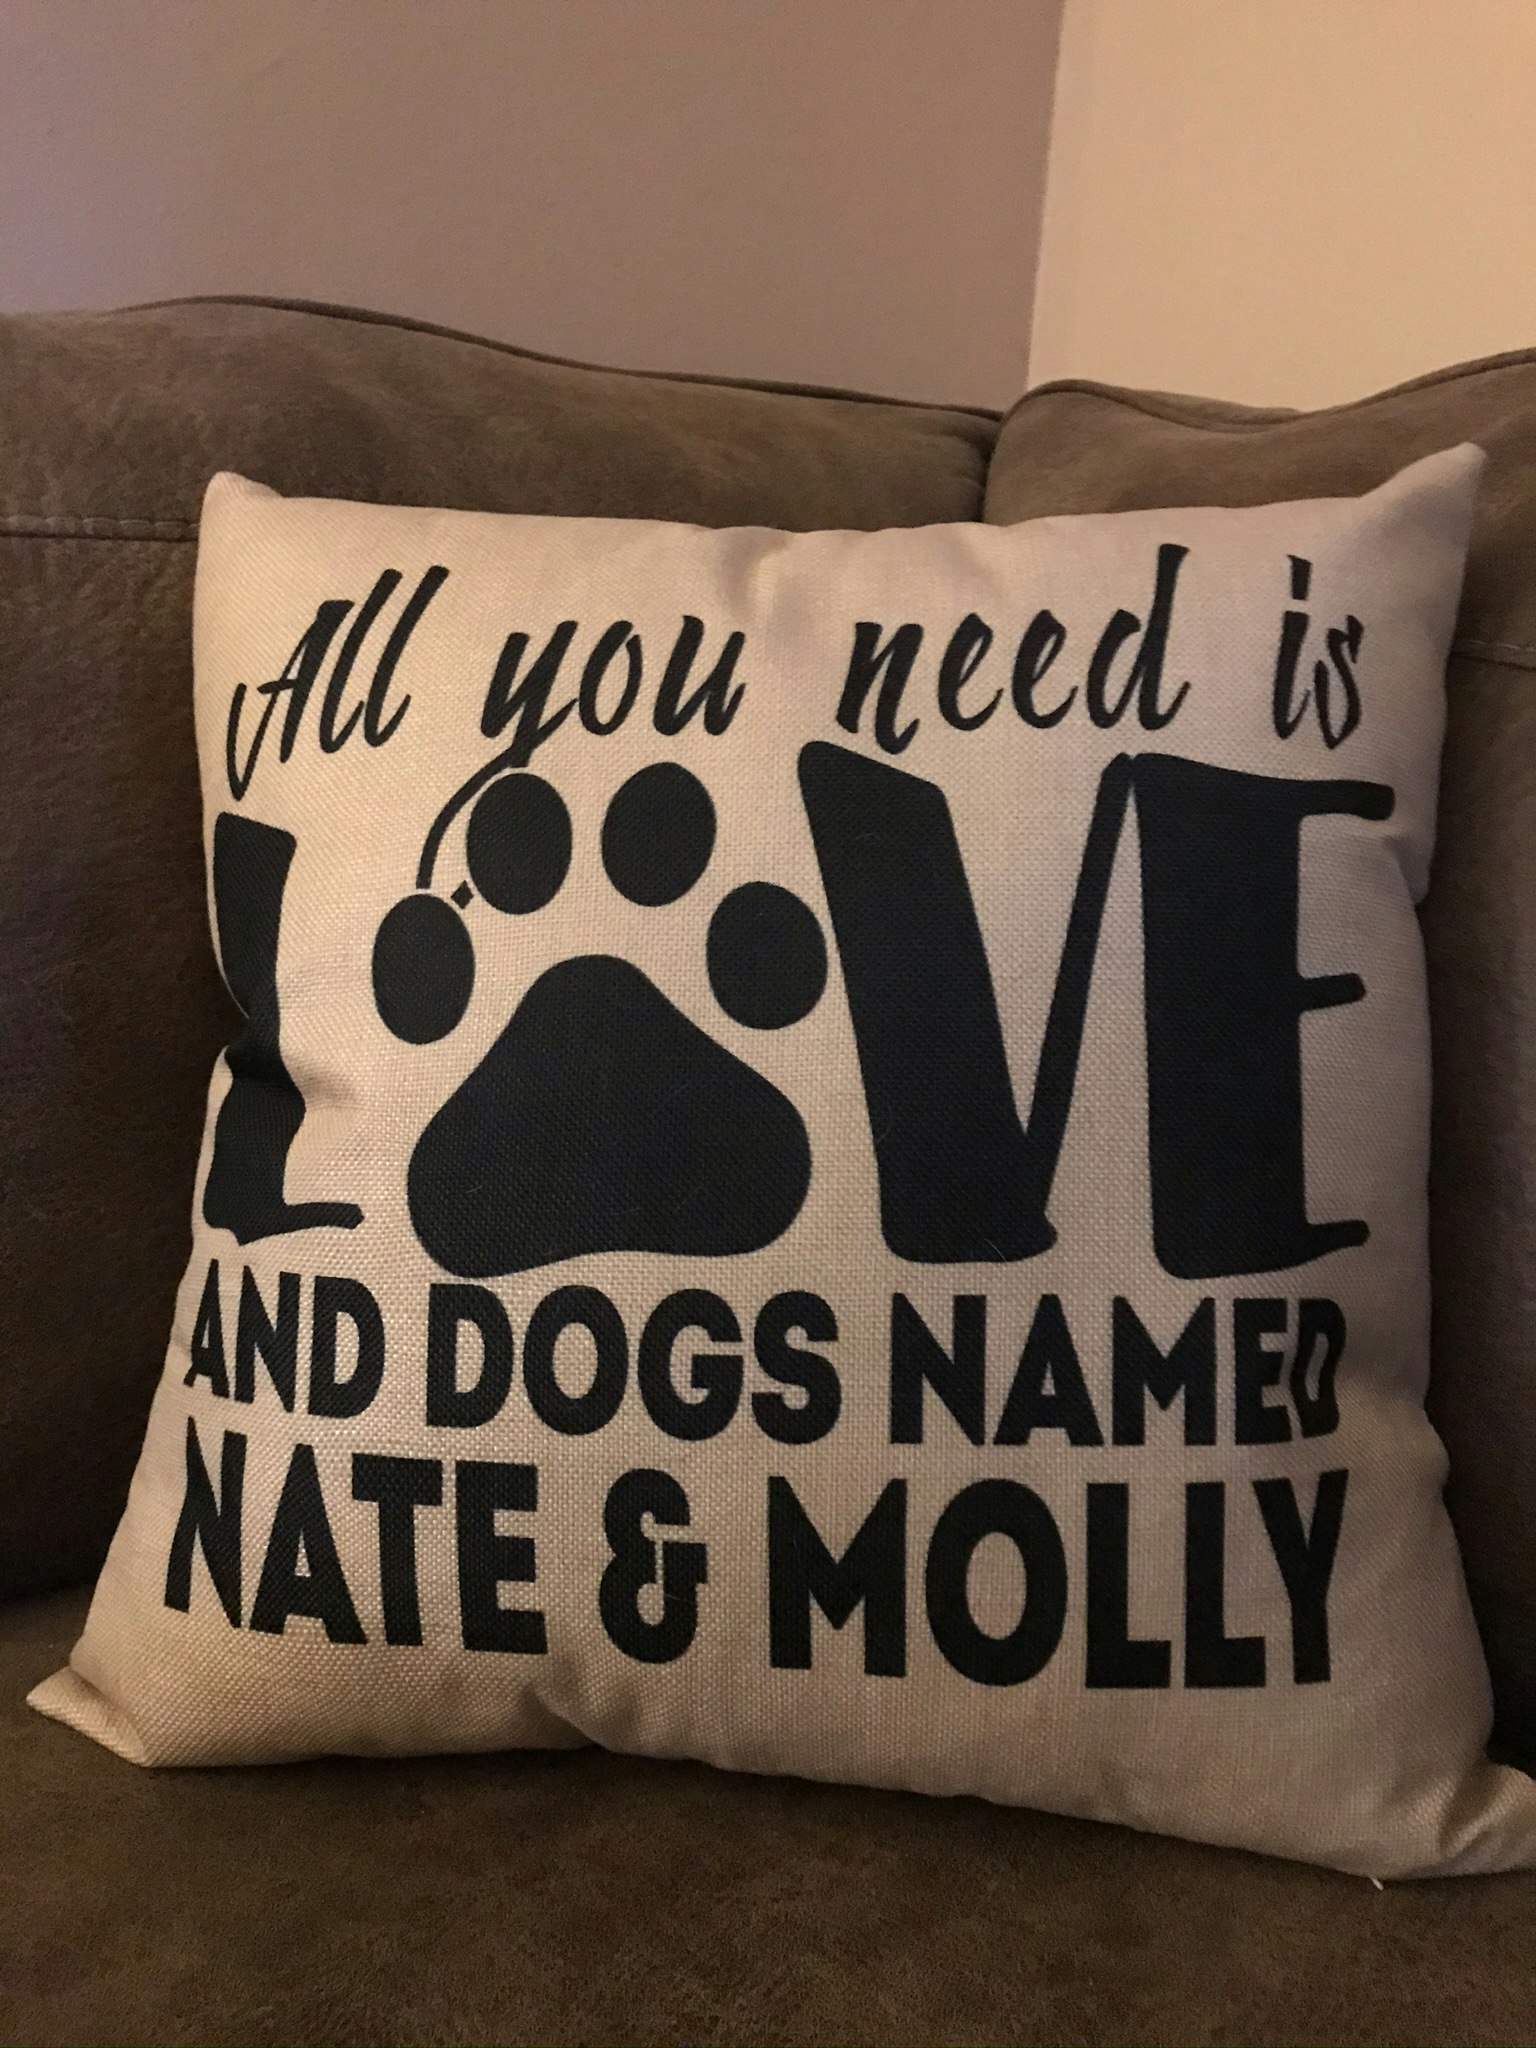 MY HOUSE IS NOT A HOME WITHOUT YOU PILLOWPersonalized Pet name Throw Pillow